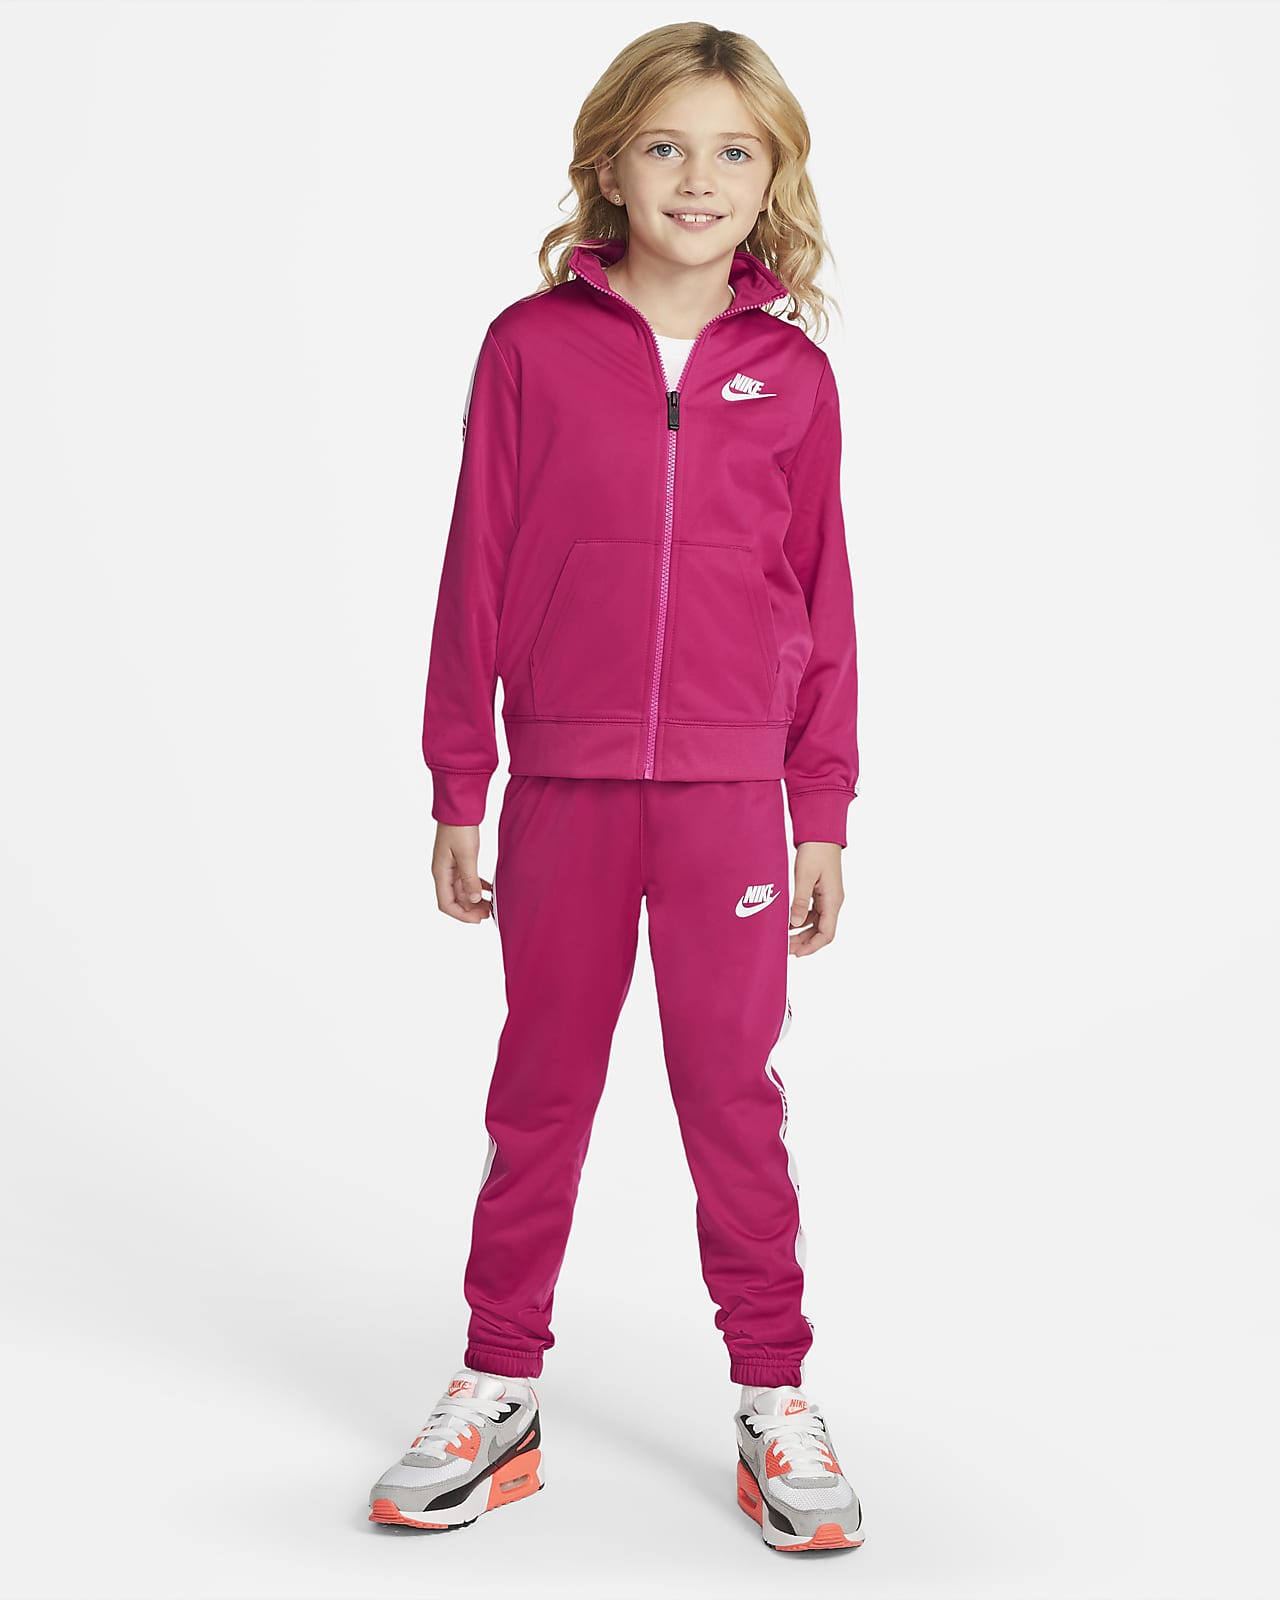 Nike Younger Kids' Jacket and Trousers 